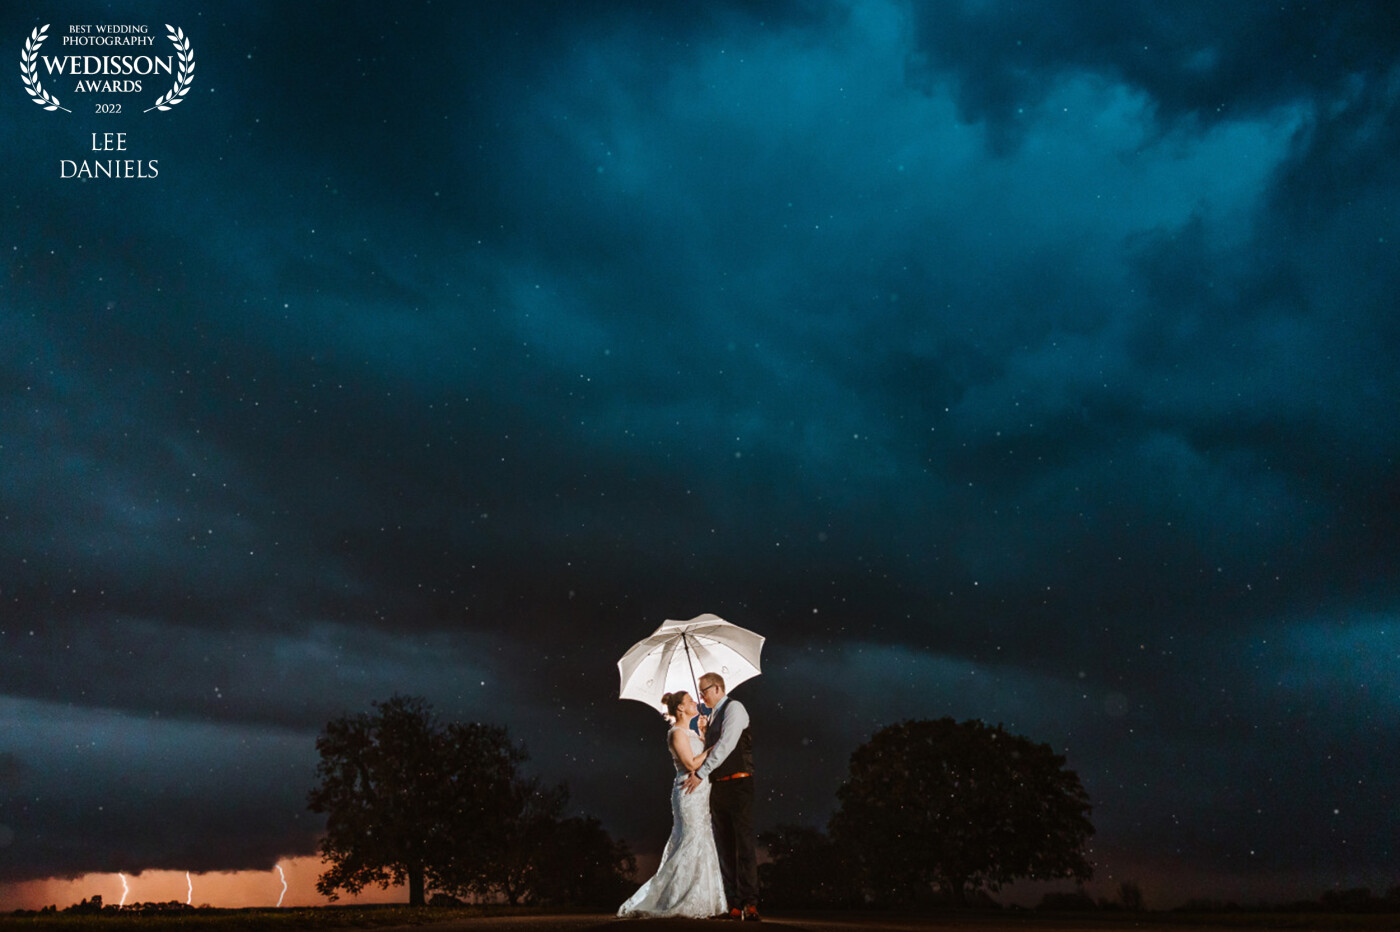 A storm was brewing all day, so when it hit and I saw the streaks of lightening piecing through I had to rush and grab Zoe & Dan, thankfully they were up for it. Really happy we managed to capture something like this <br />
<br />
Venue - Bassmead Manor